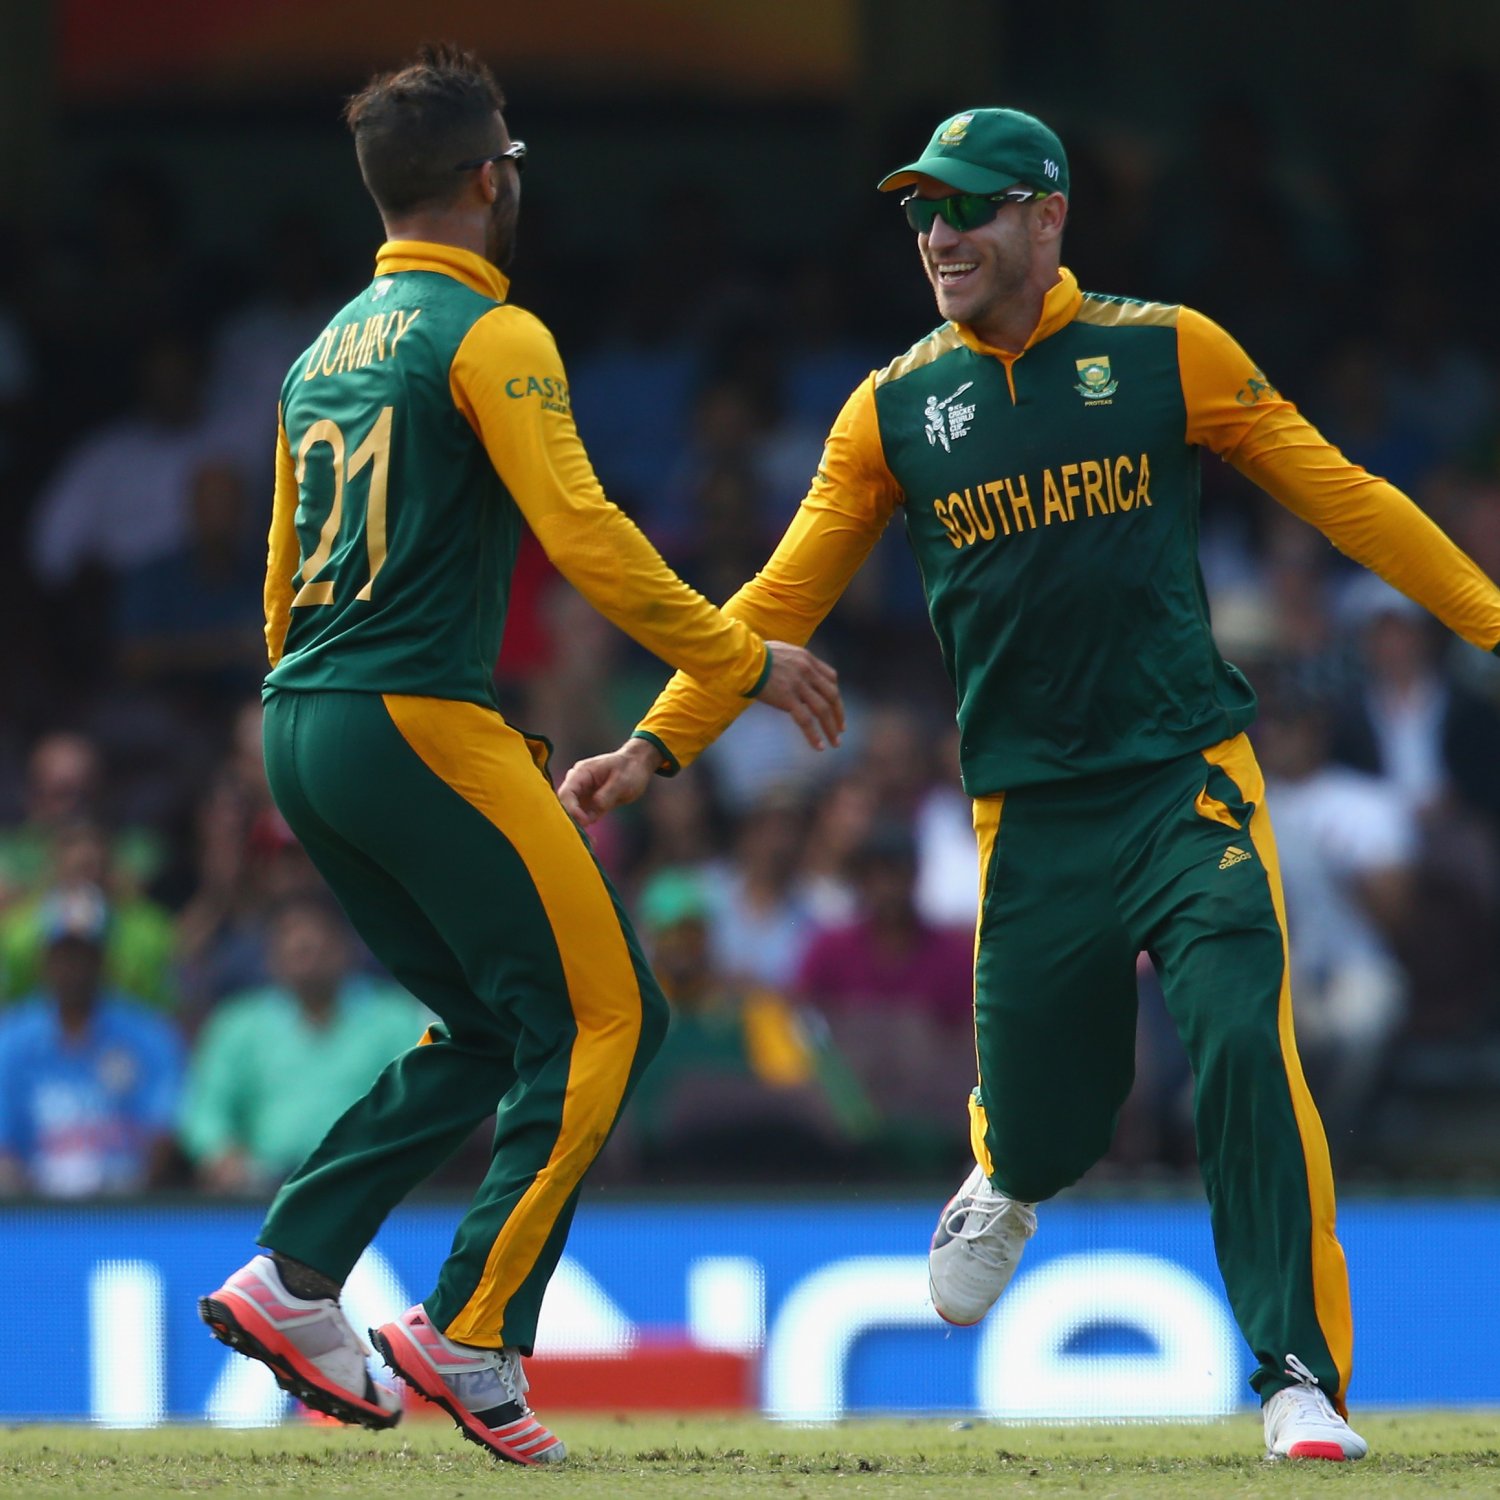 JP Duminy Takes First South Africa HatTrick at Cricket World Cup